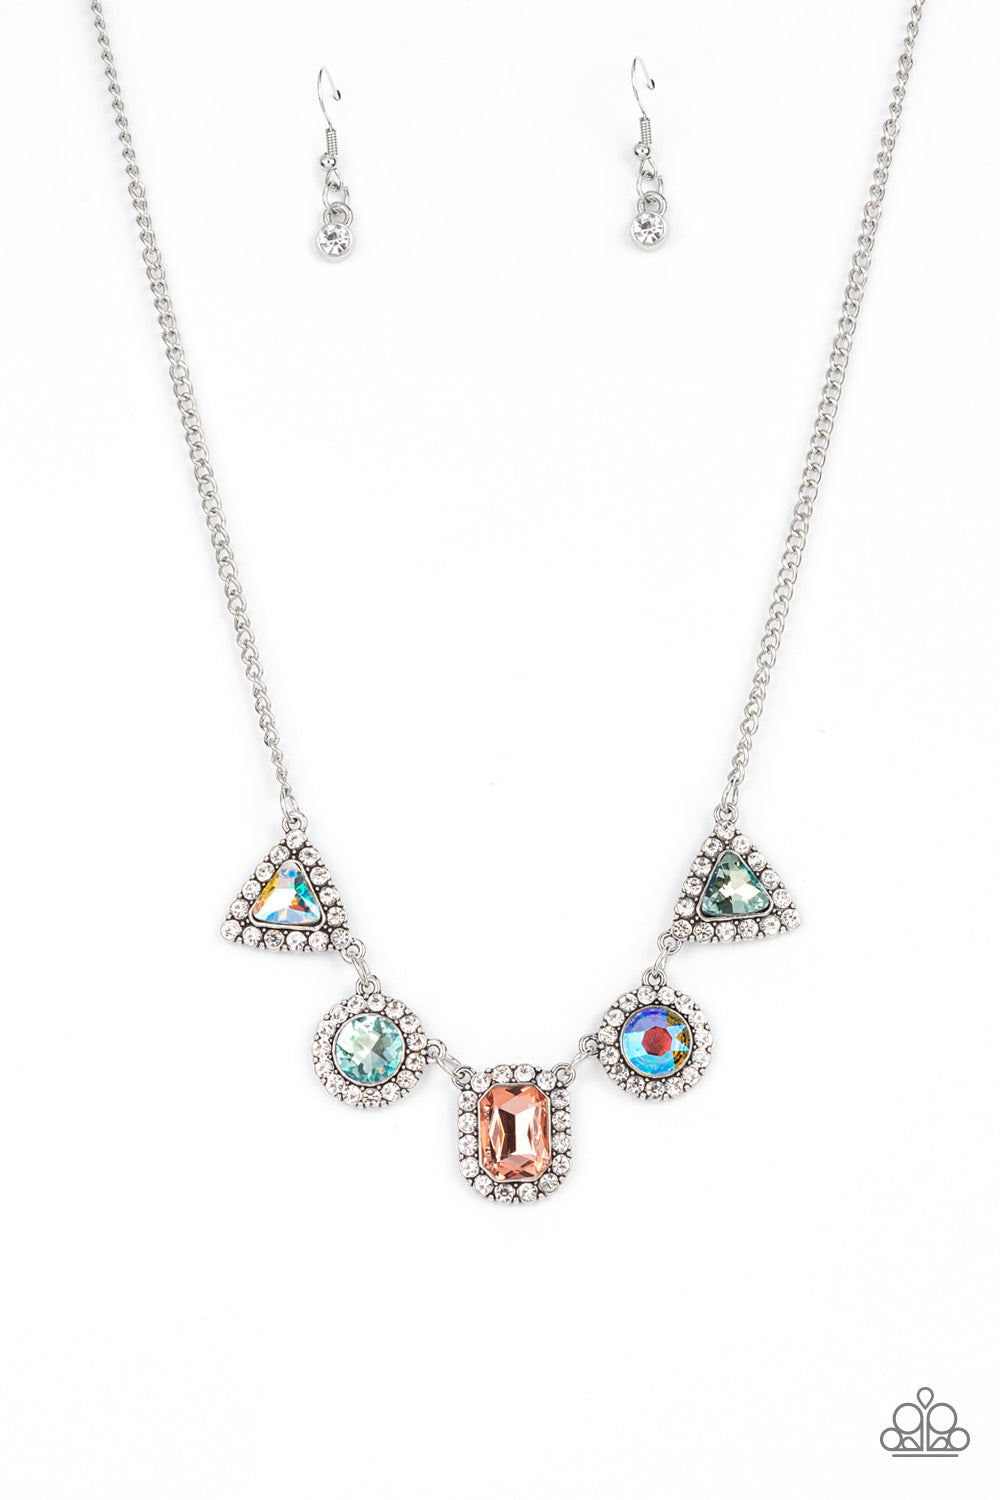 Posh Party Avenue Multi Necklace - Paparazzi Accessories  Featuring triangular, round, and emerald style cuts, an iridescent collection of multicolored rhinestones are bordered in glassy white rhinestones as they delicately link below the collar for a sparkly statement. Features an adjustable clasp closure.  Sold as one individual necklace. Includes one pair of matching earrings.